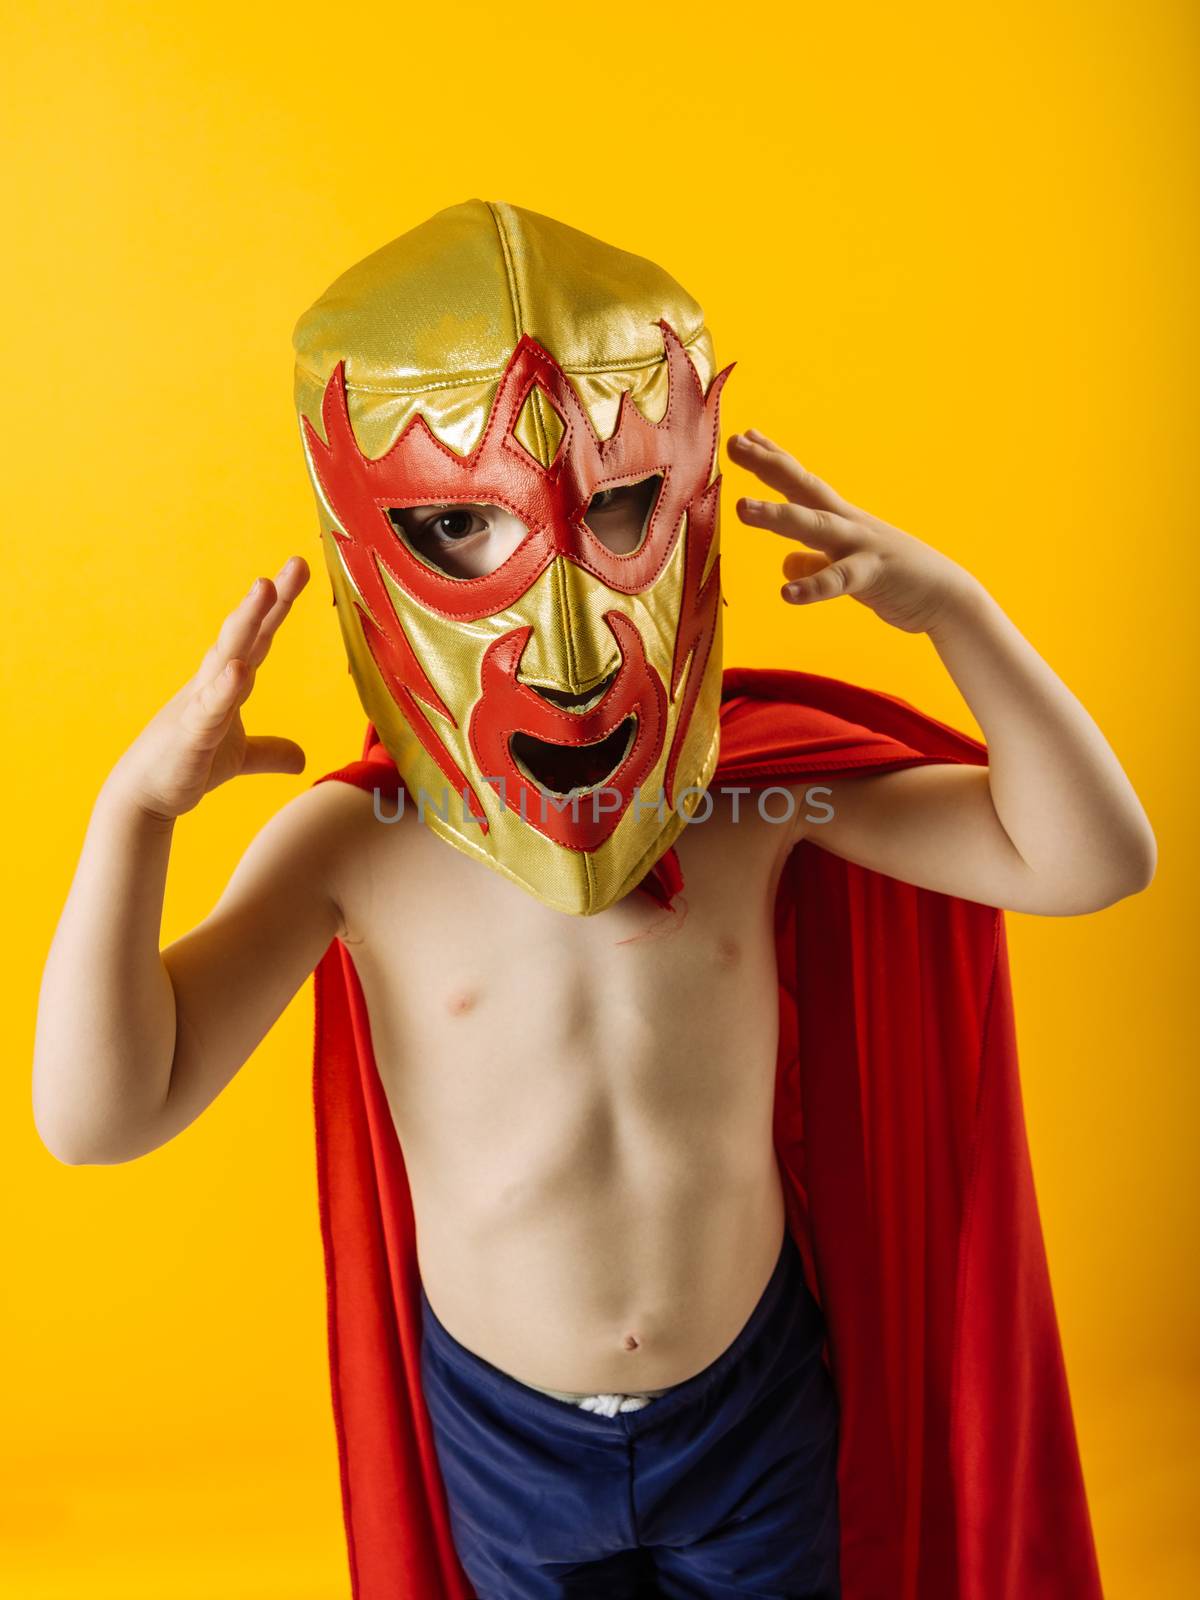 Tiny mexican wrestler by sumners